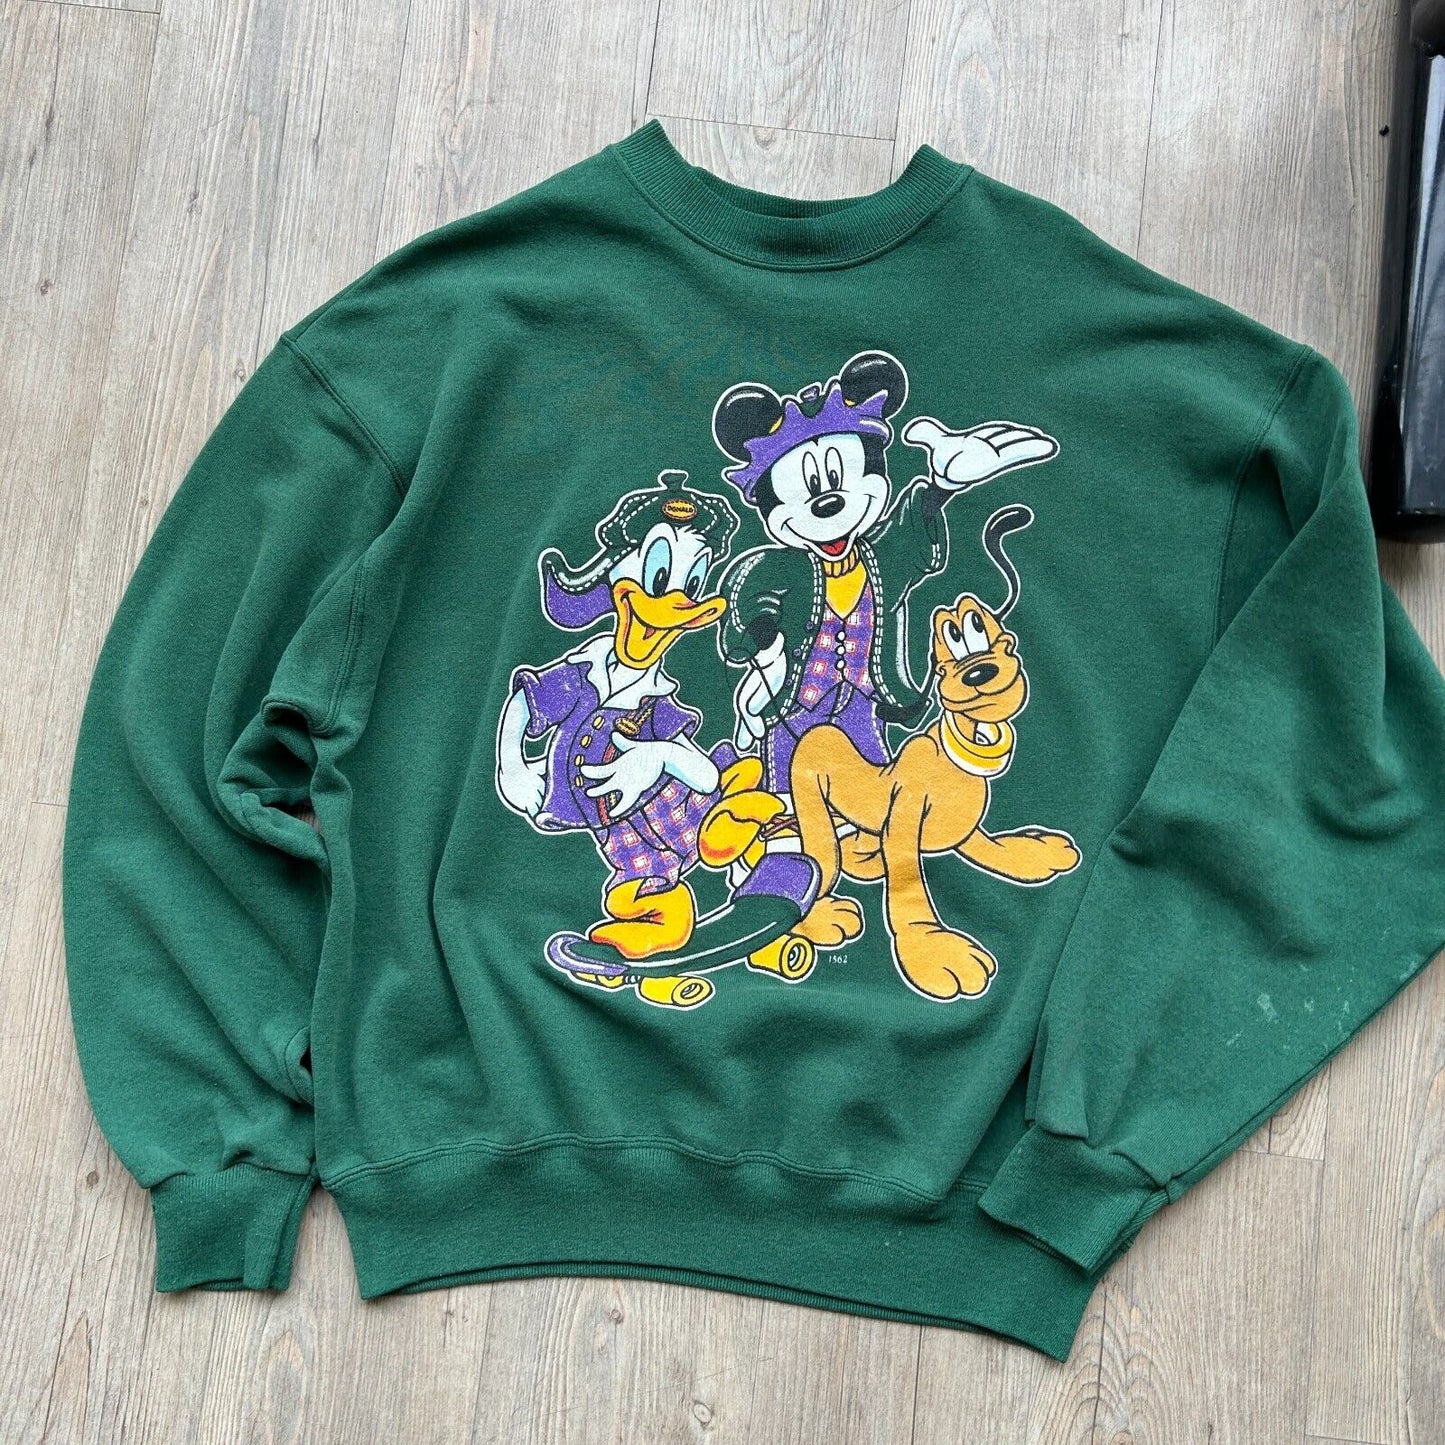 VINTAGE 90s | Mickey Mouse Donald Duck Pluto Cartoon Sweater sz L Adult